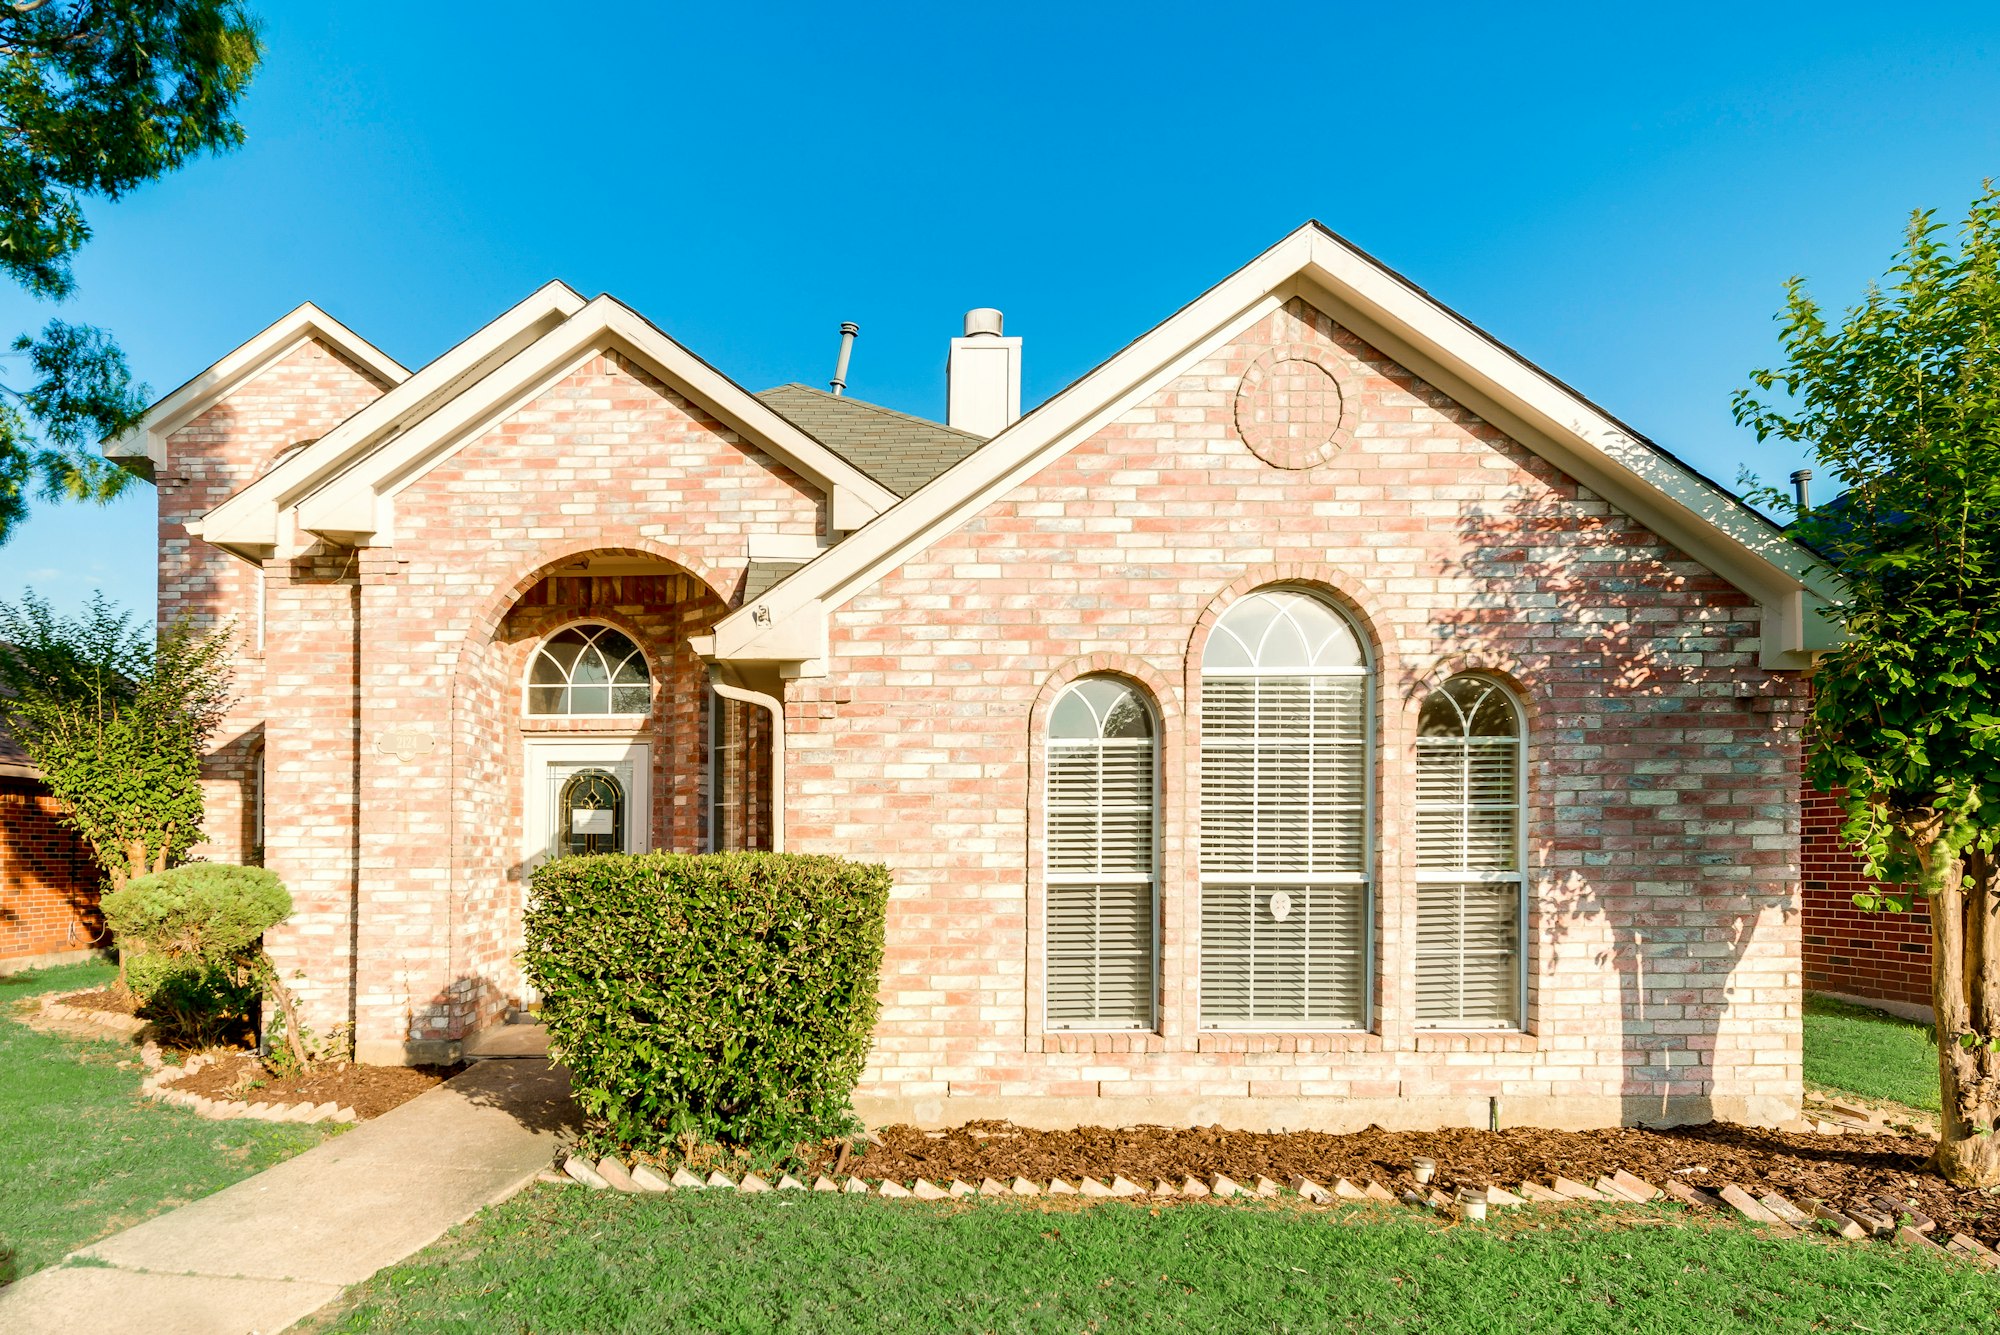 Photo 1 of 27 - 2124 Amber Spgs, Mesquite, TX 75181